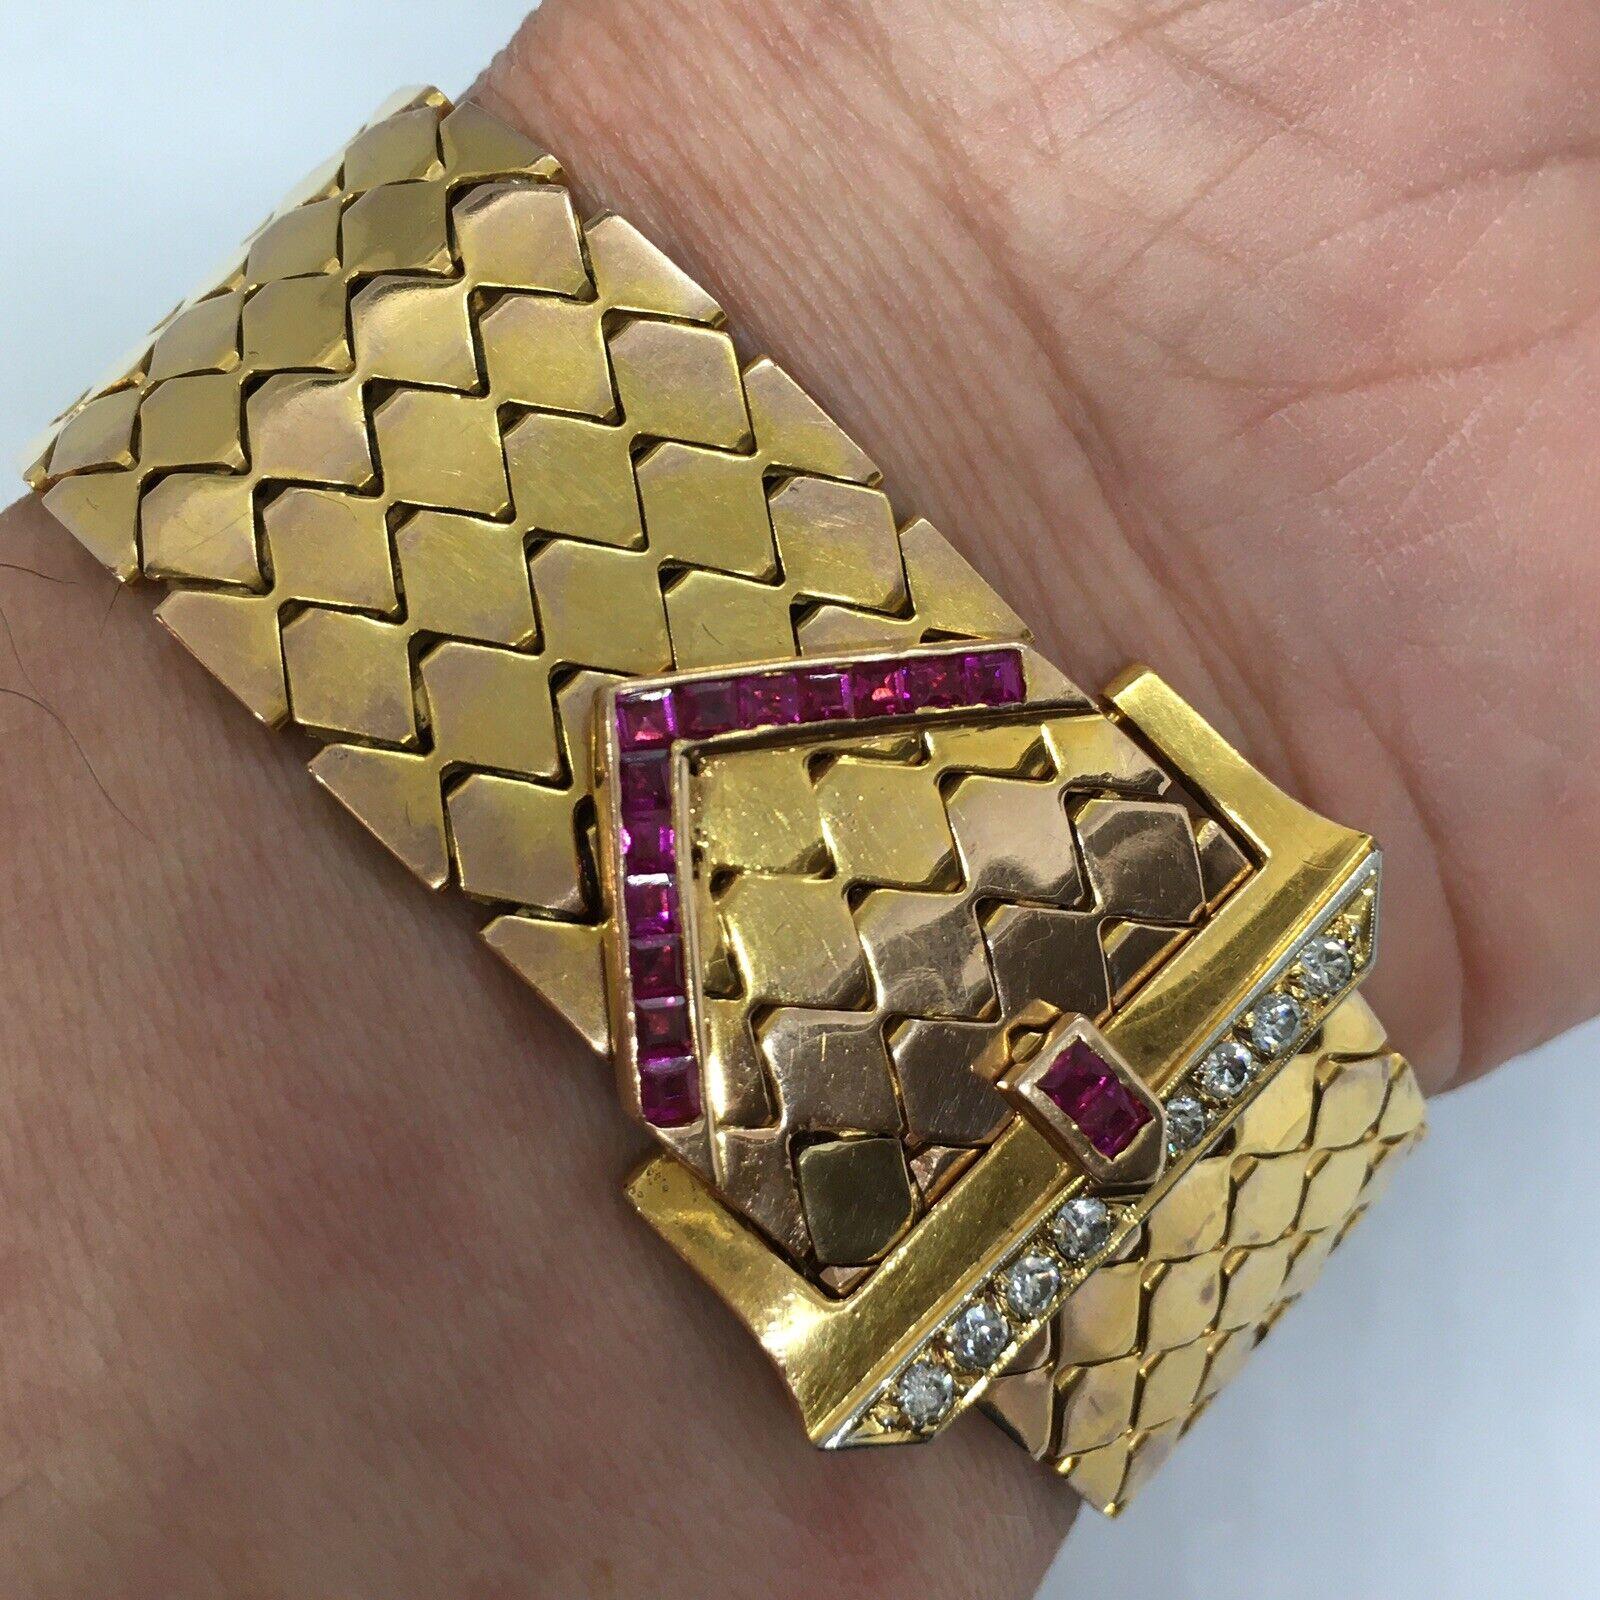 Retro Diamond Ruby Buckle Bracelet 14K American Gold 1940s

66.5 gram
Marked and tested 14K
23 mm wide
8.75 inch long
15 pieces of square cut Ruby( not tested), usage of created Ruby is common on Retro, circa 1940s,  American made jewelry.
8 pieces